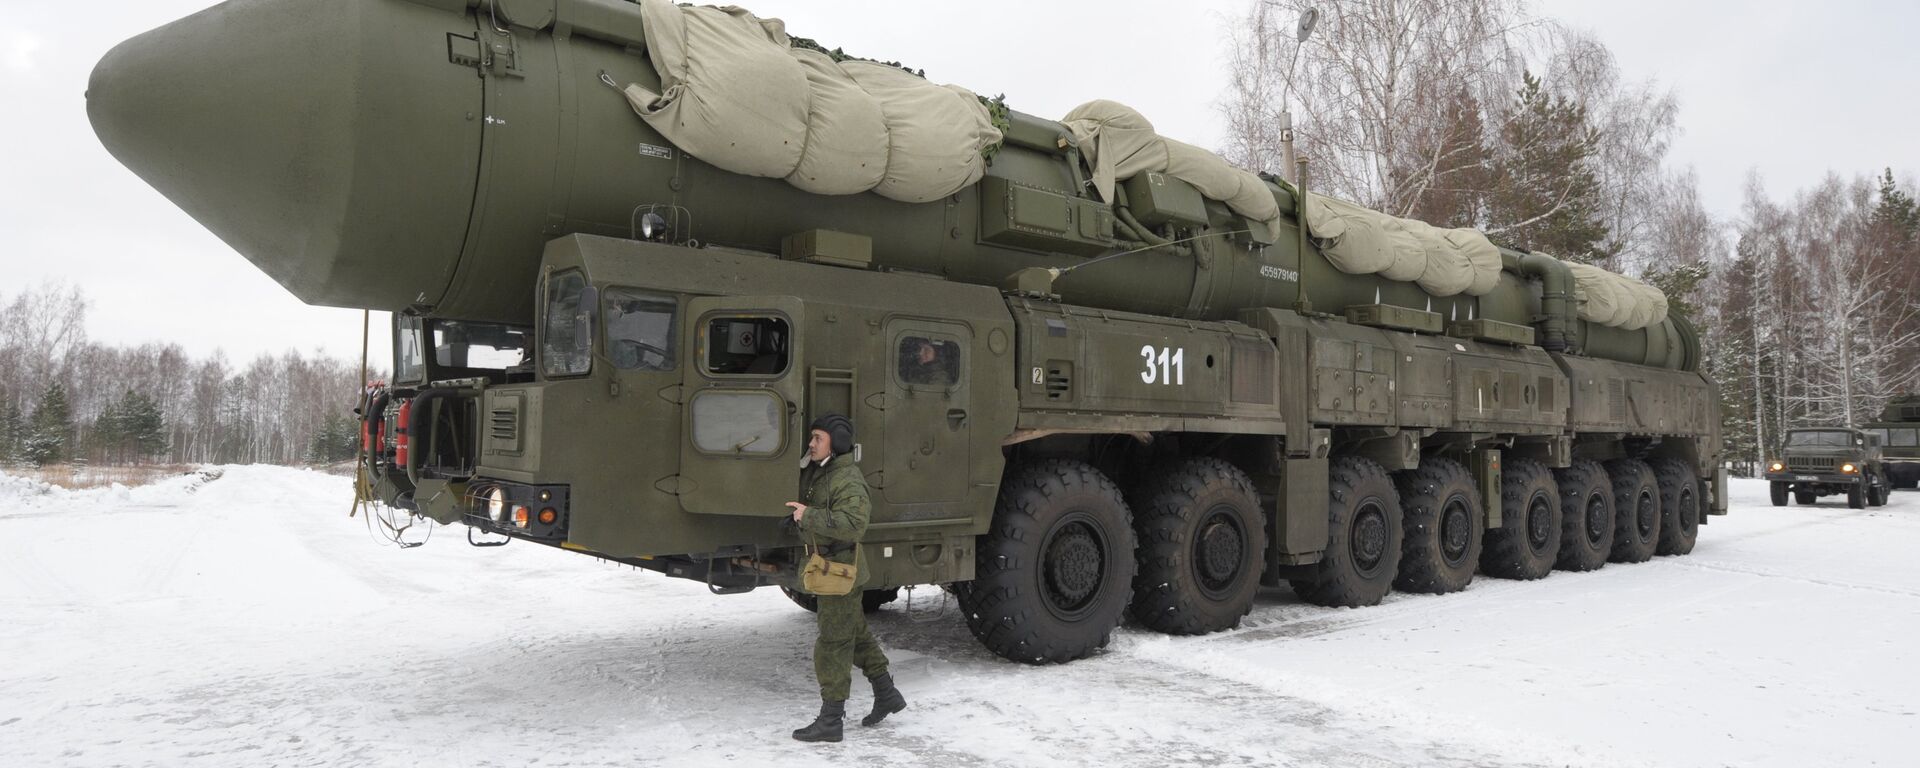 Mobile launcher 'Yars' missile system on the territory of Teykovo air defence missile formation in Ivanovo region. - Sputnik International, 1920, 06.02.2019